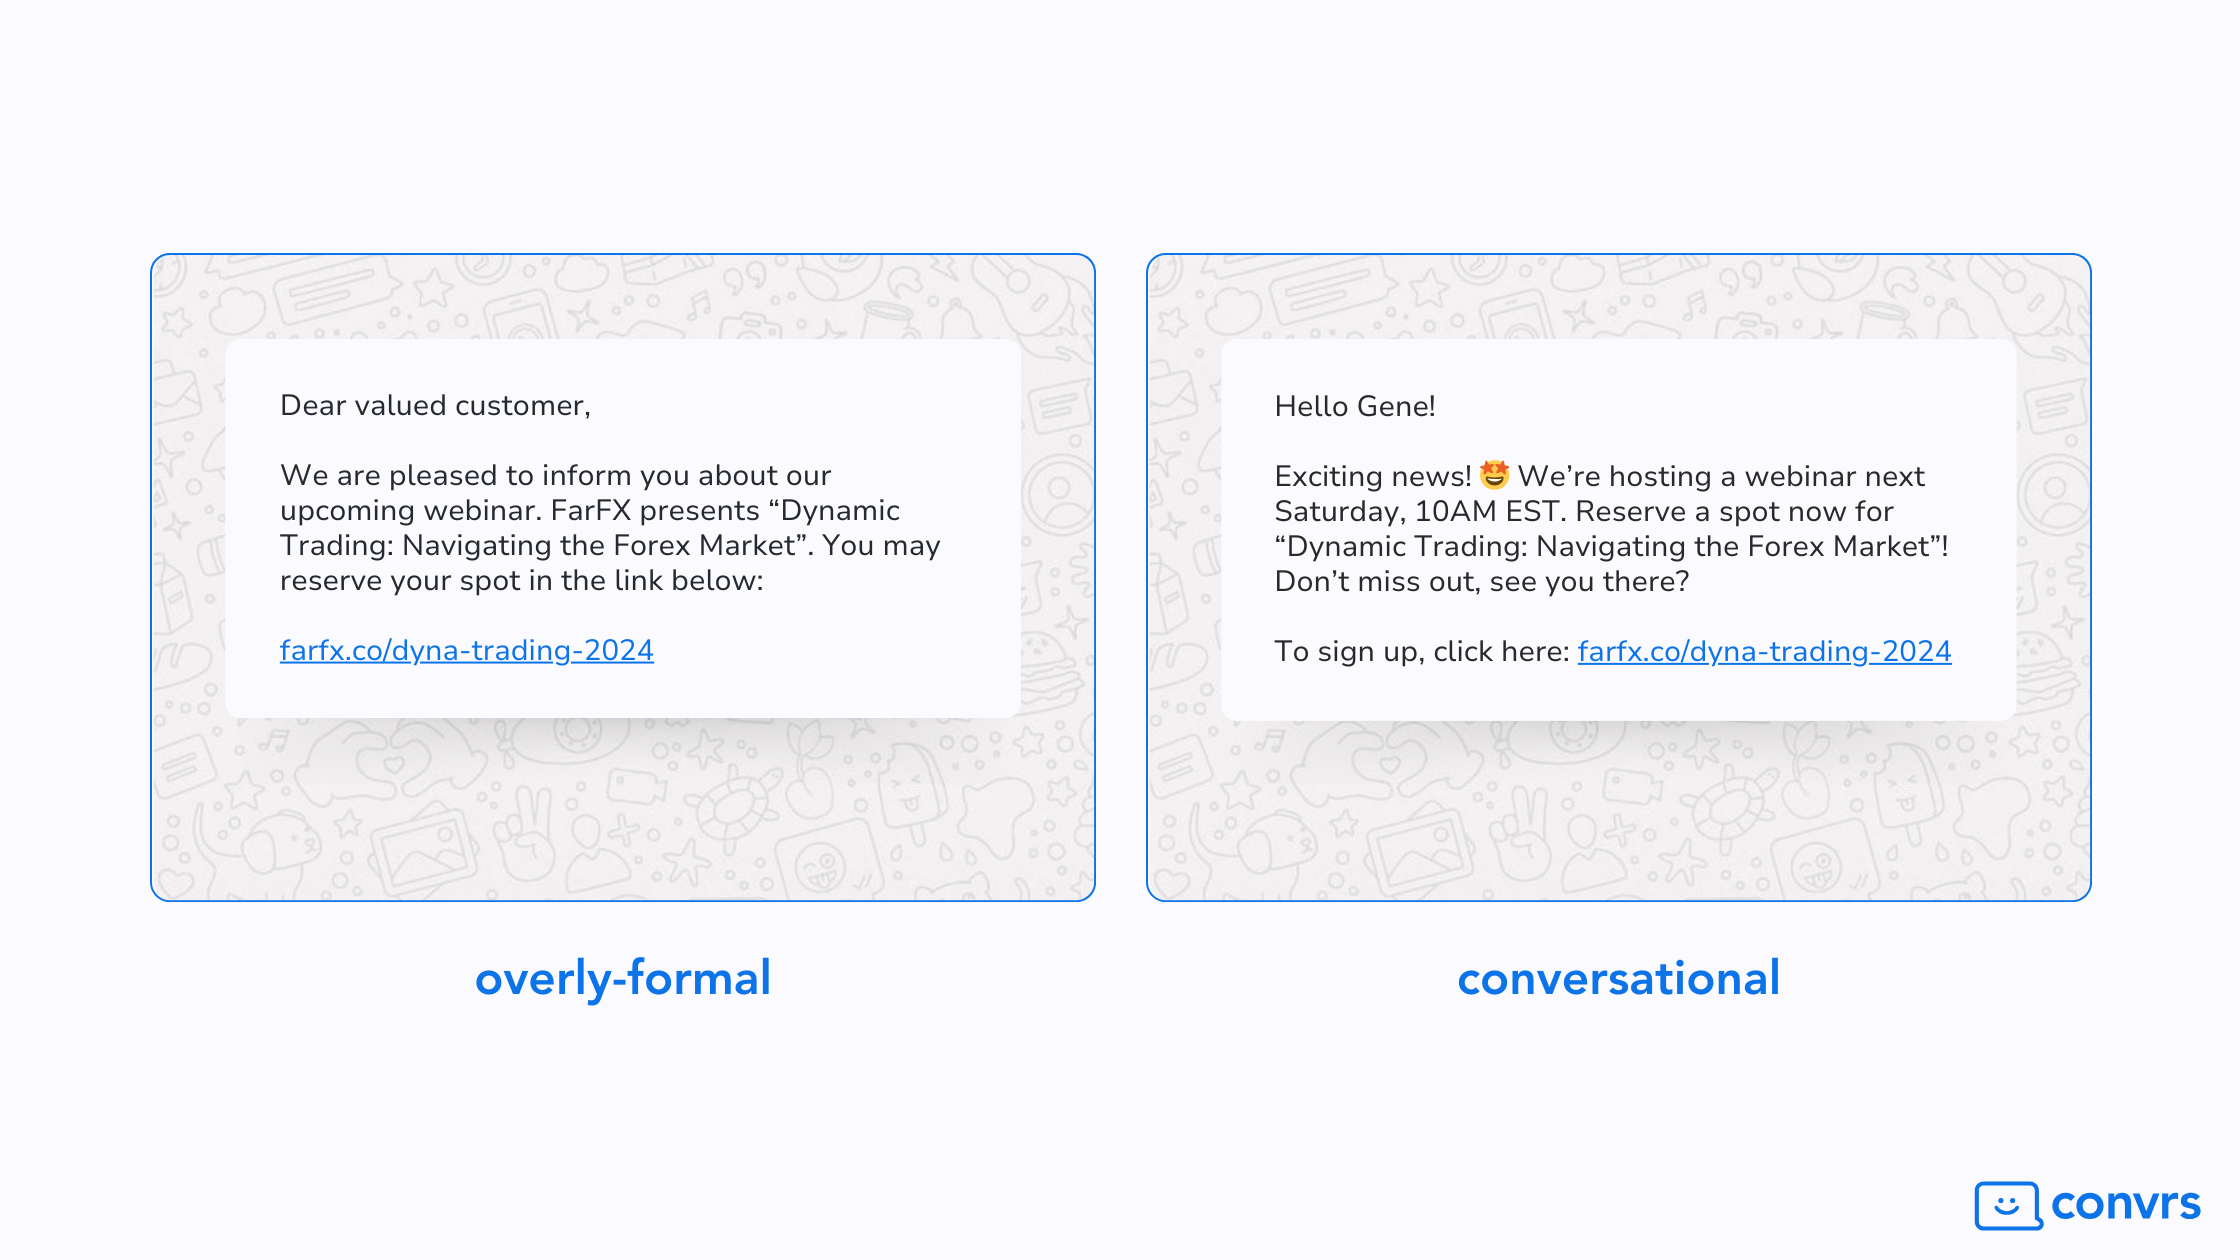 Visual comparing an overly-formal message versus a conversational message